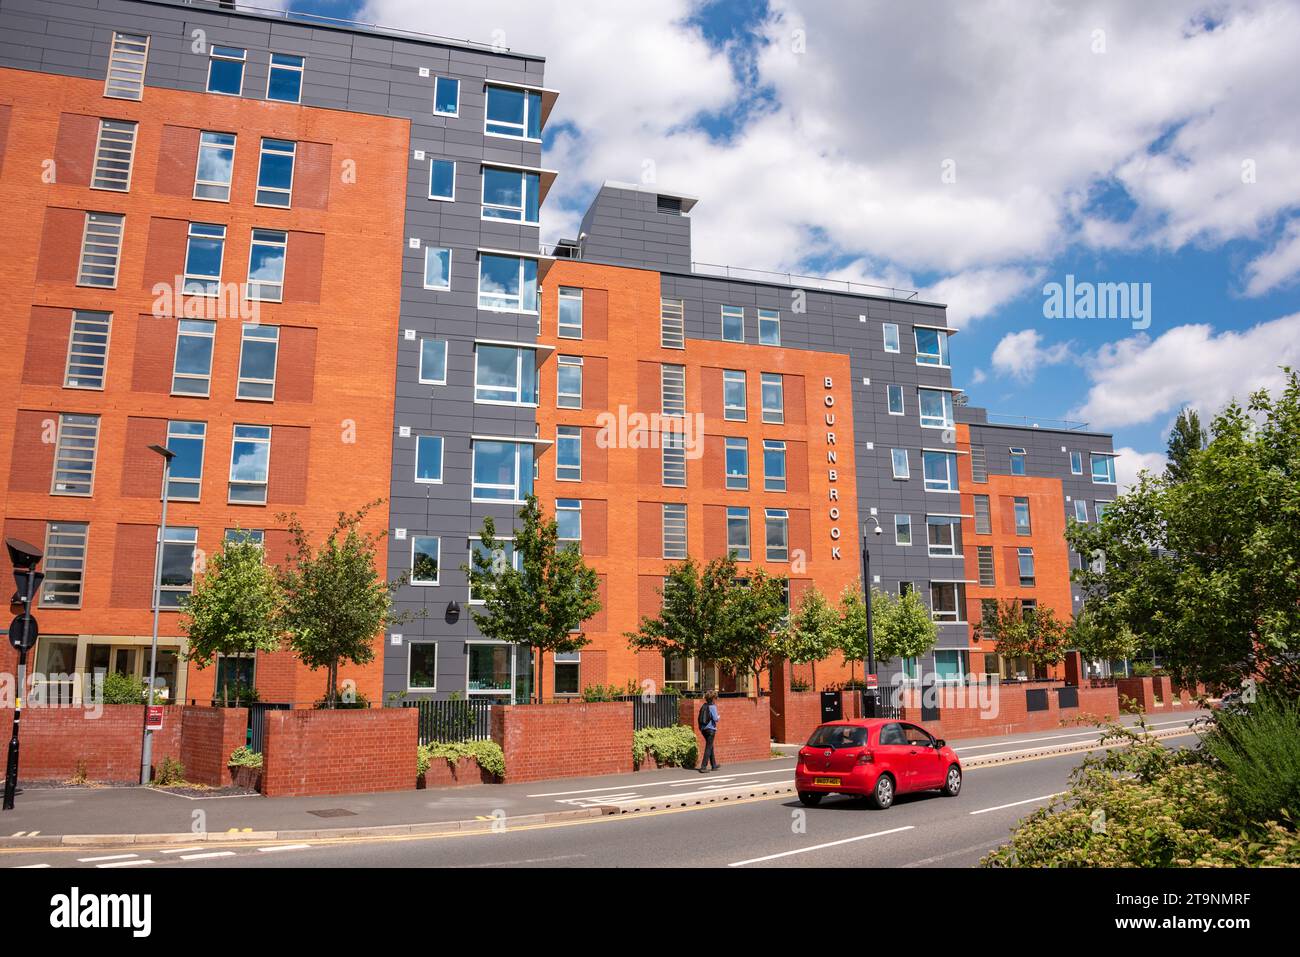 Purpose-built student accommodation in Selly Oak, close to the University of Birmingham, UK Stock Photo